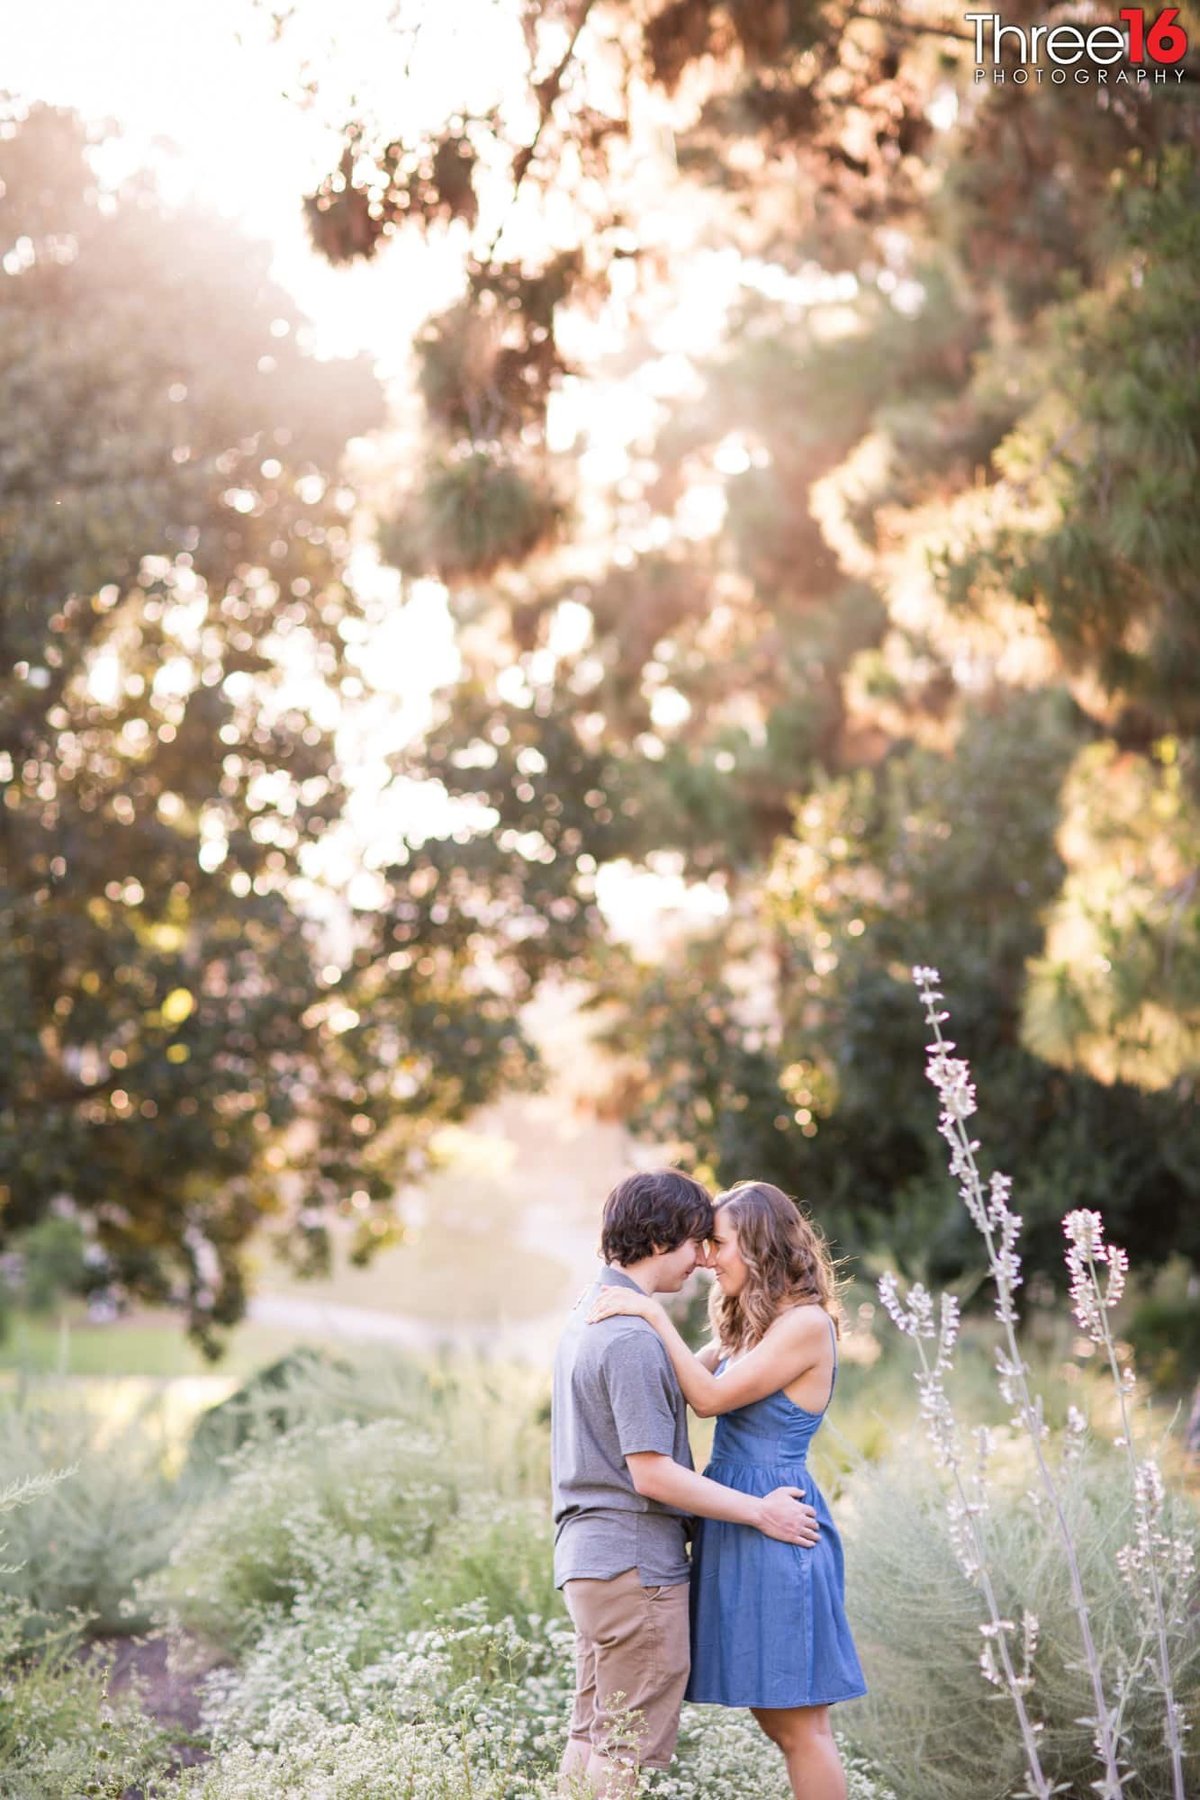 Tender moment between Engaged couple in a nature field